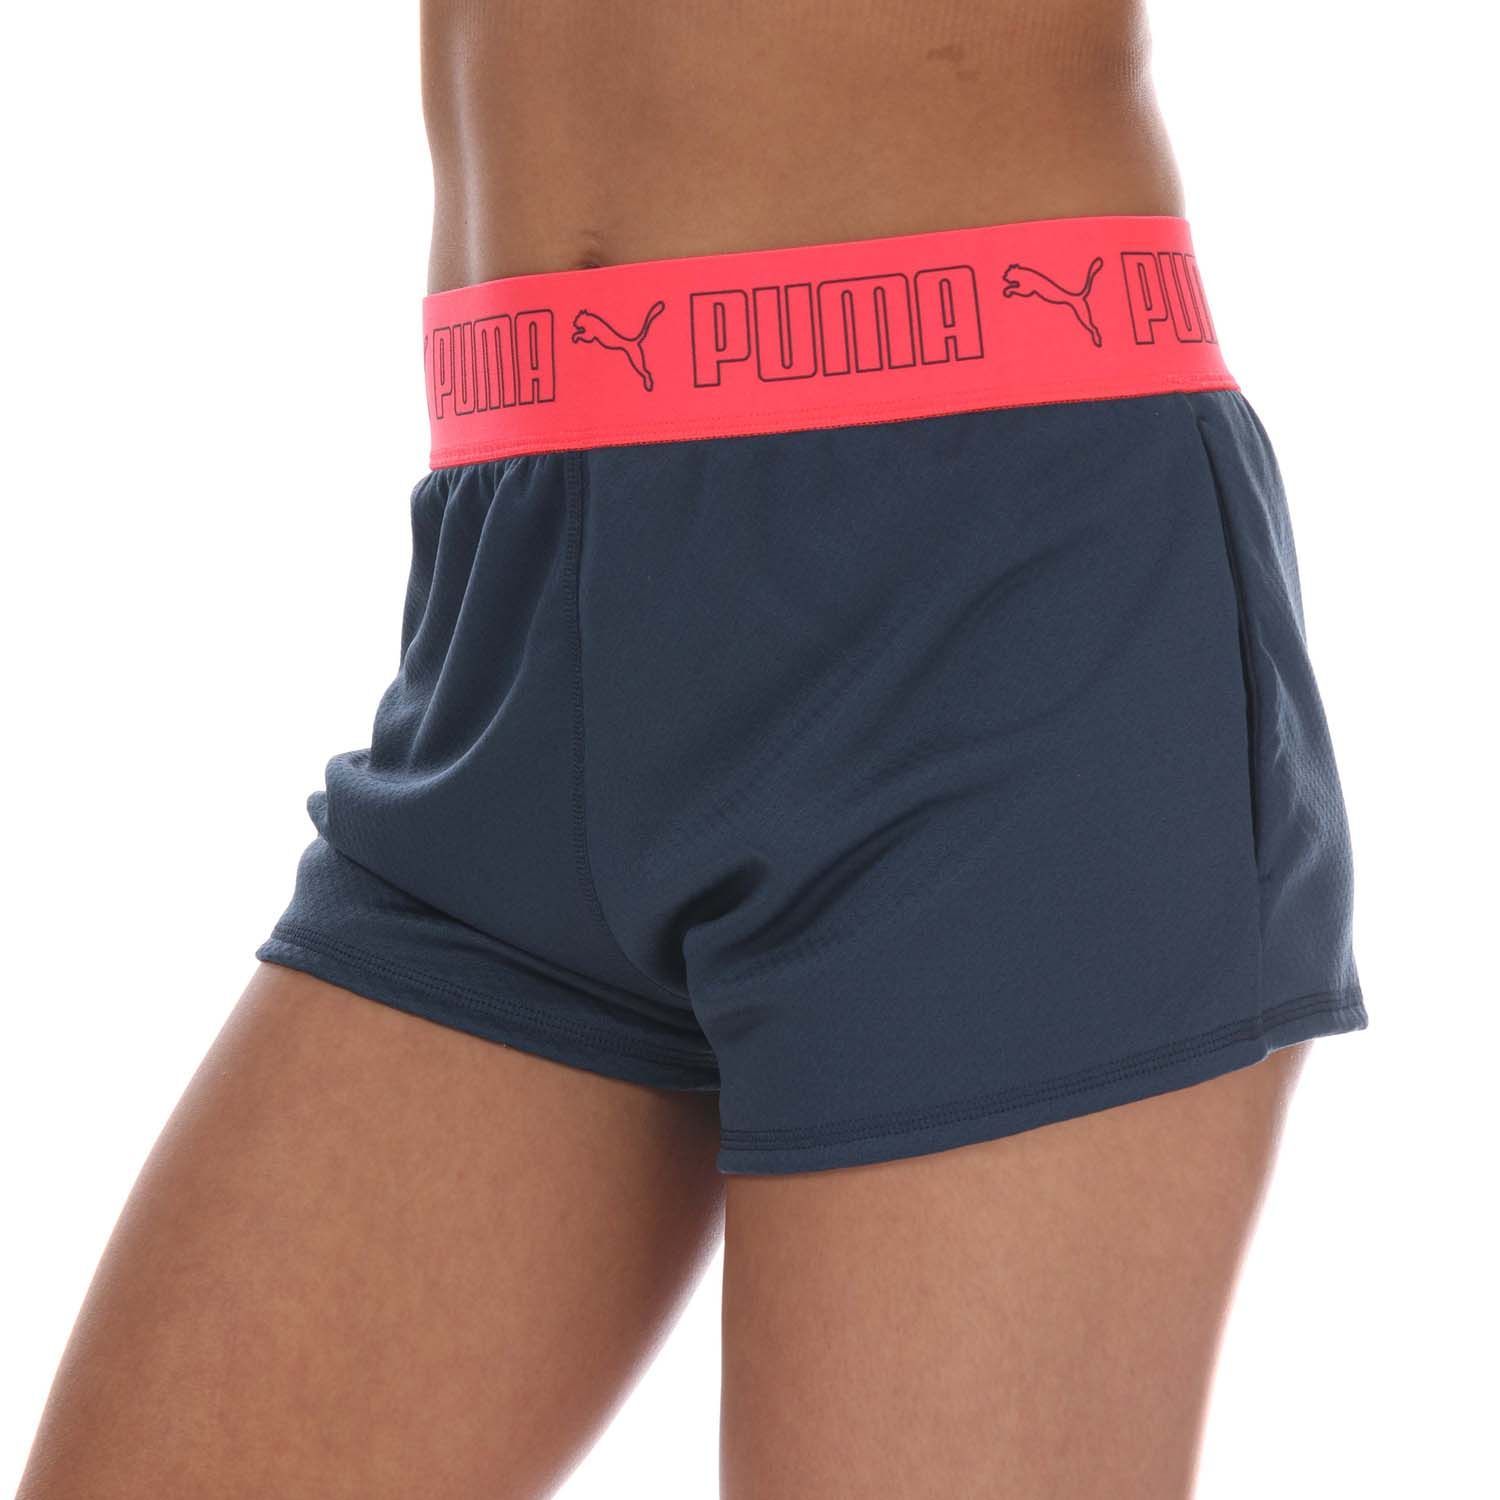 Womens Puma Elastic 3 Inch Training Shorts in dark blue.- Wide elasticated waistband.- Lightweight construction.- Puma branding to the waistband and leg.- Shell: 100% Polyester.  Machine washable.- Ref:52028566